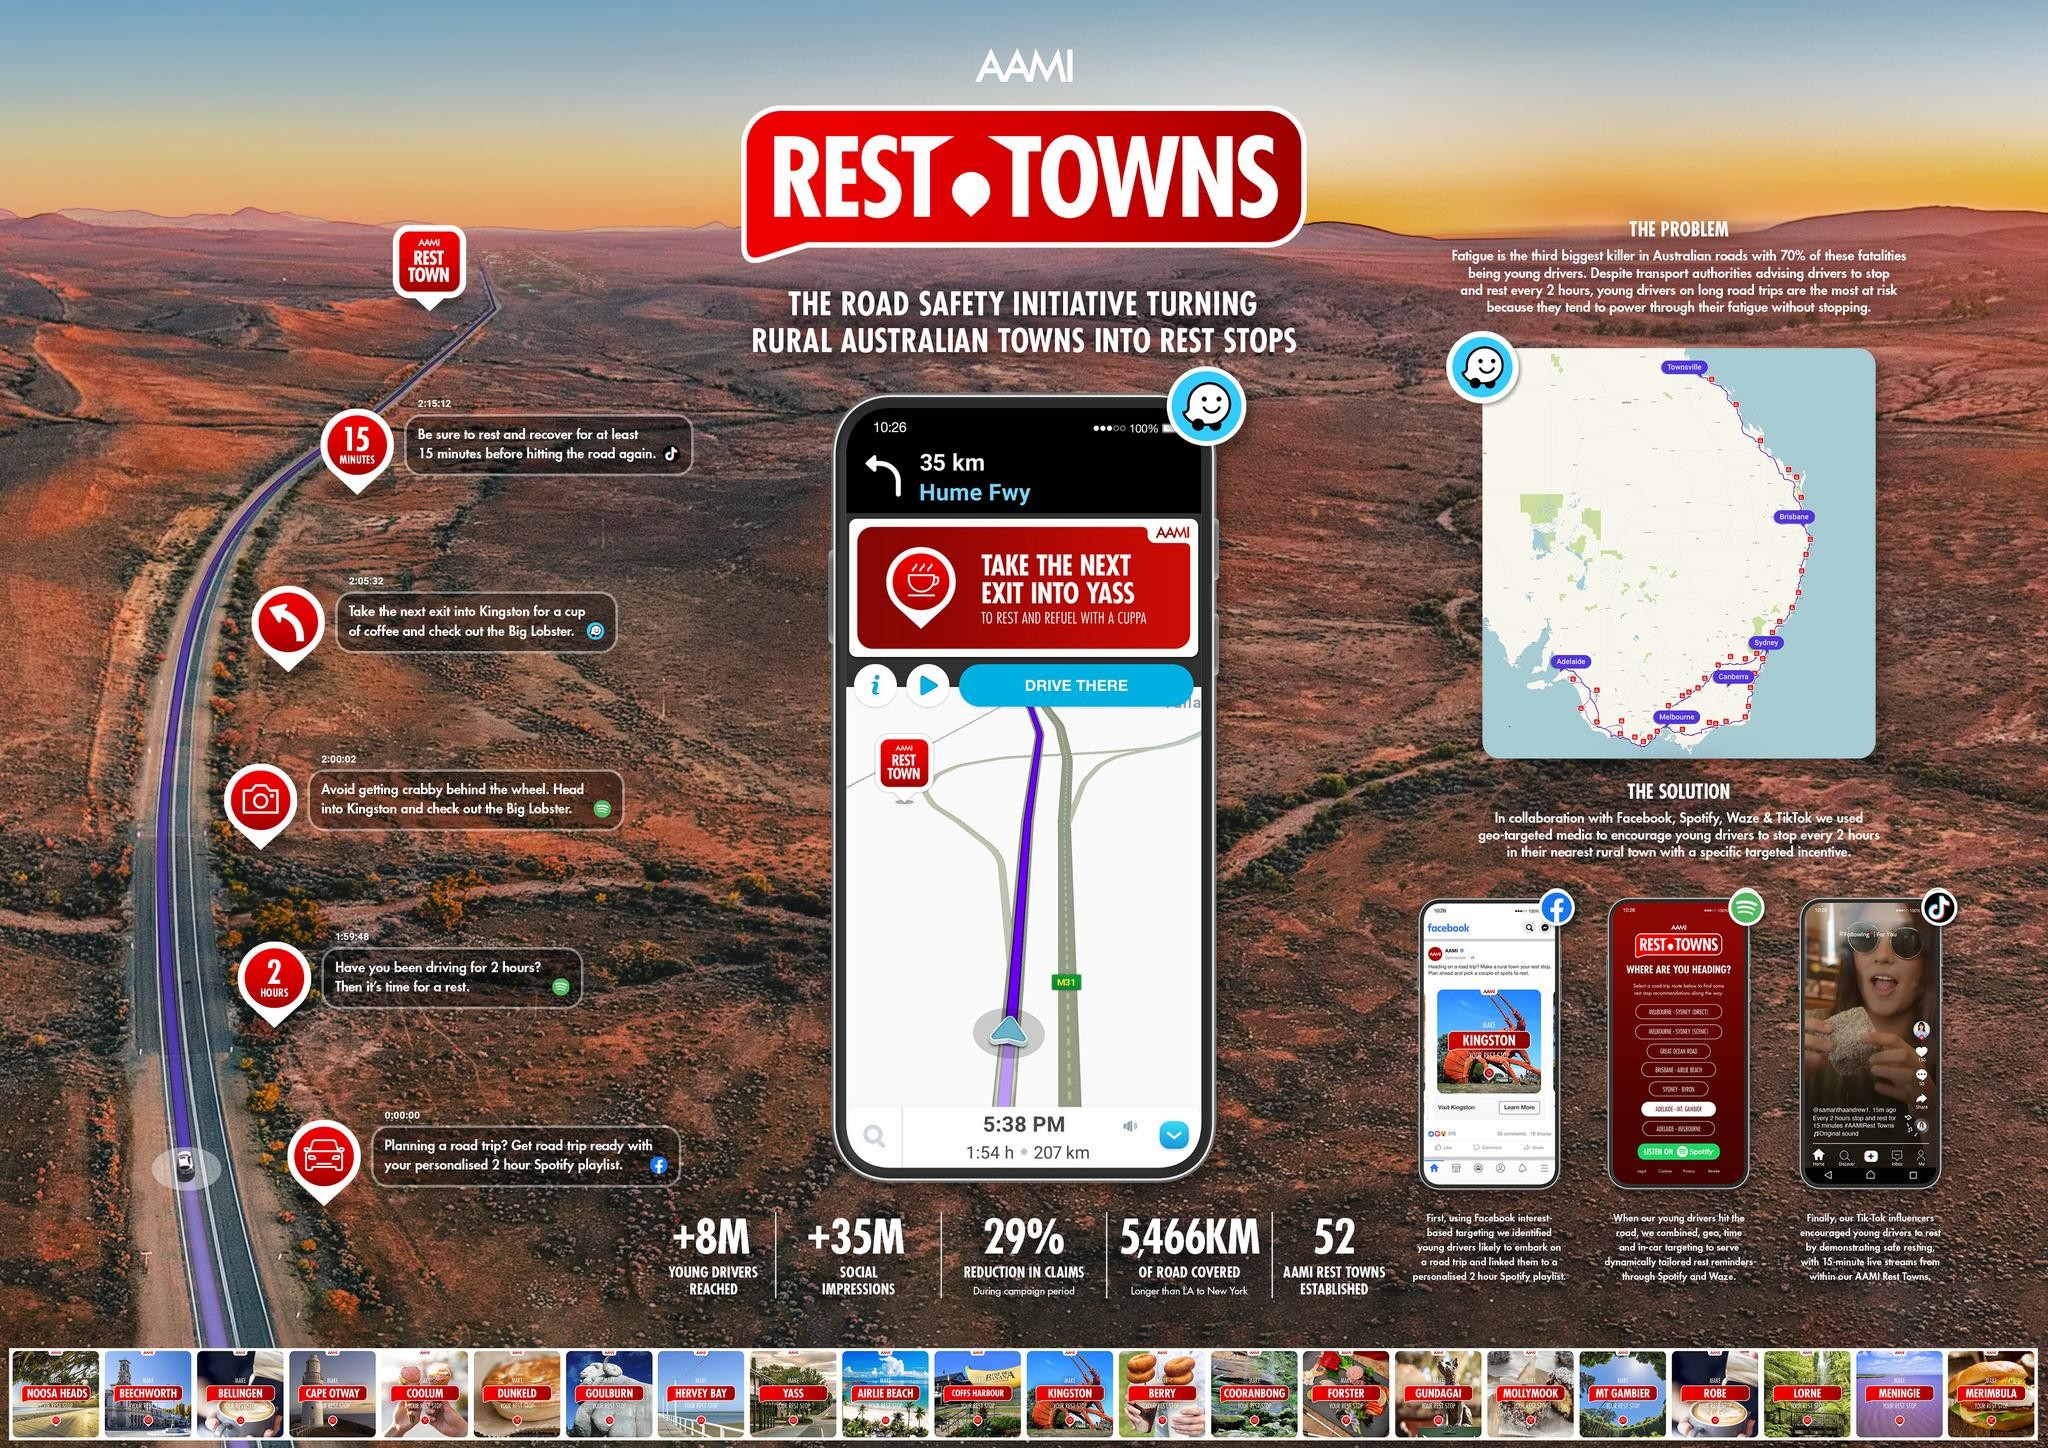 AAMI Rest Towns